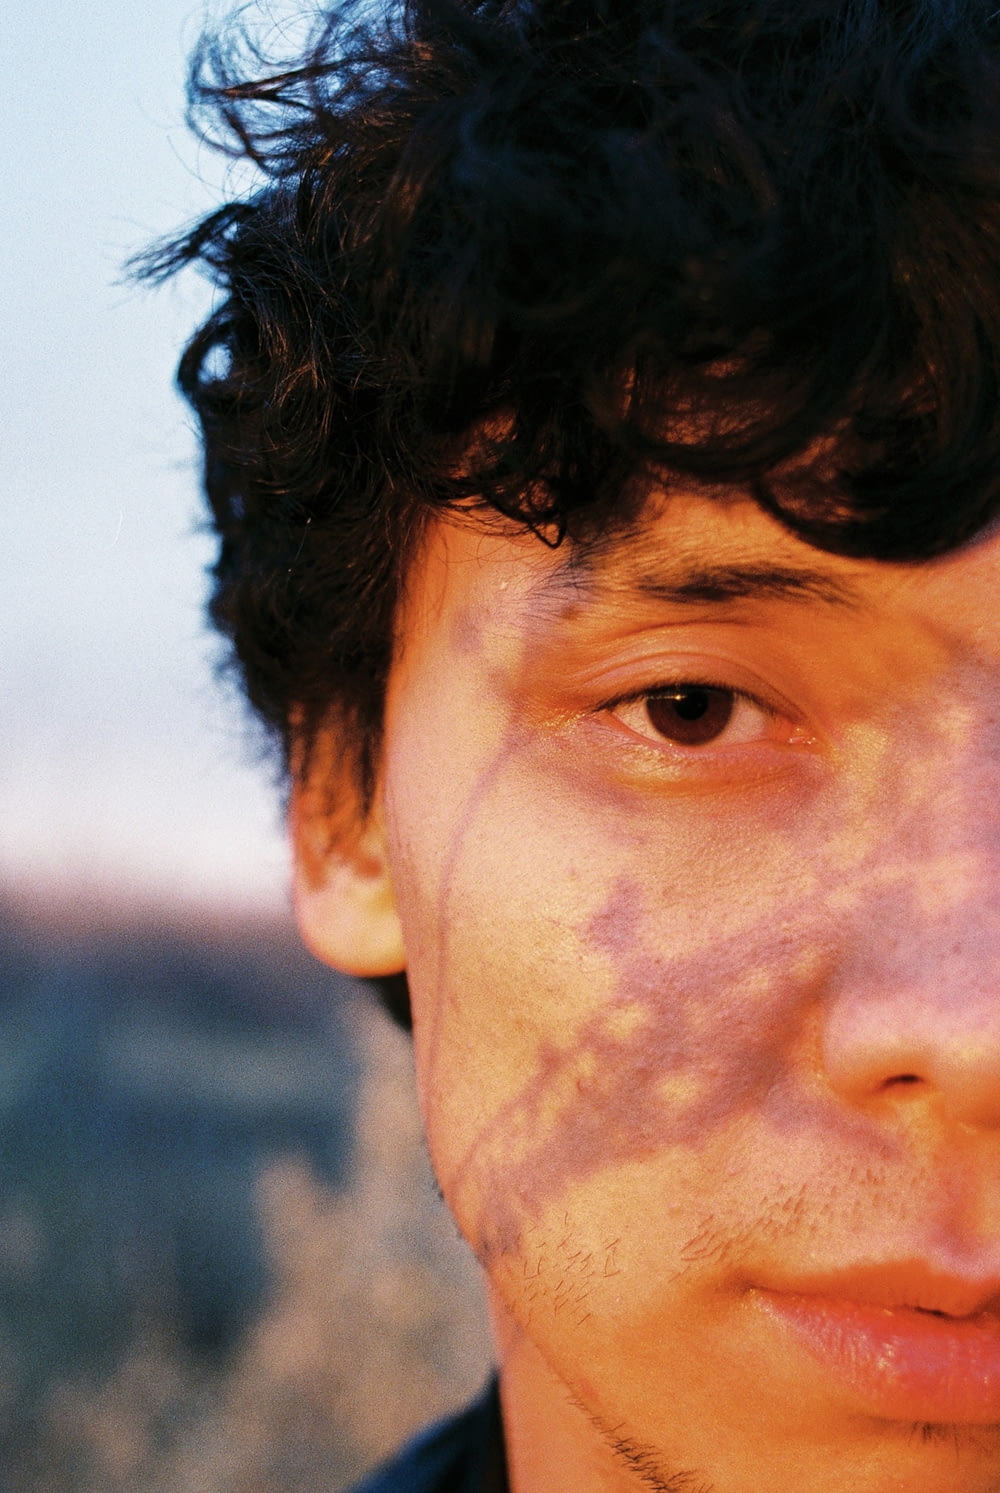 a close up of a person with freckles on his face